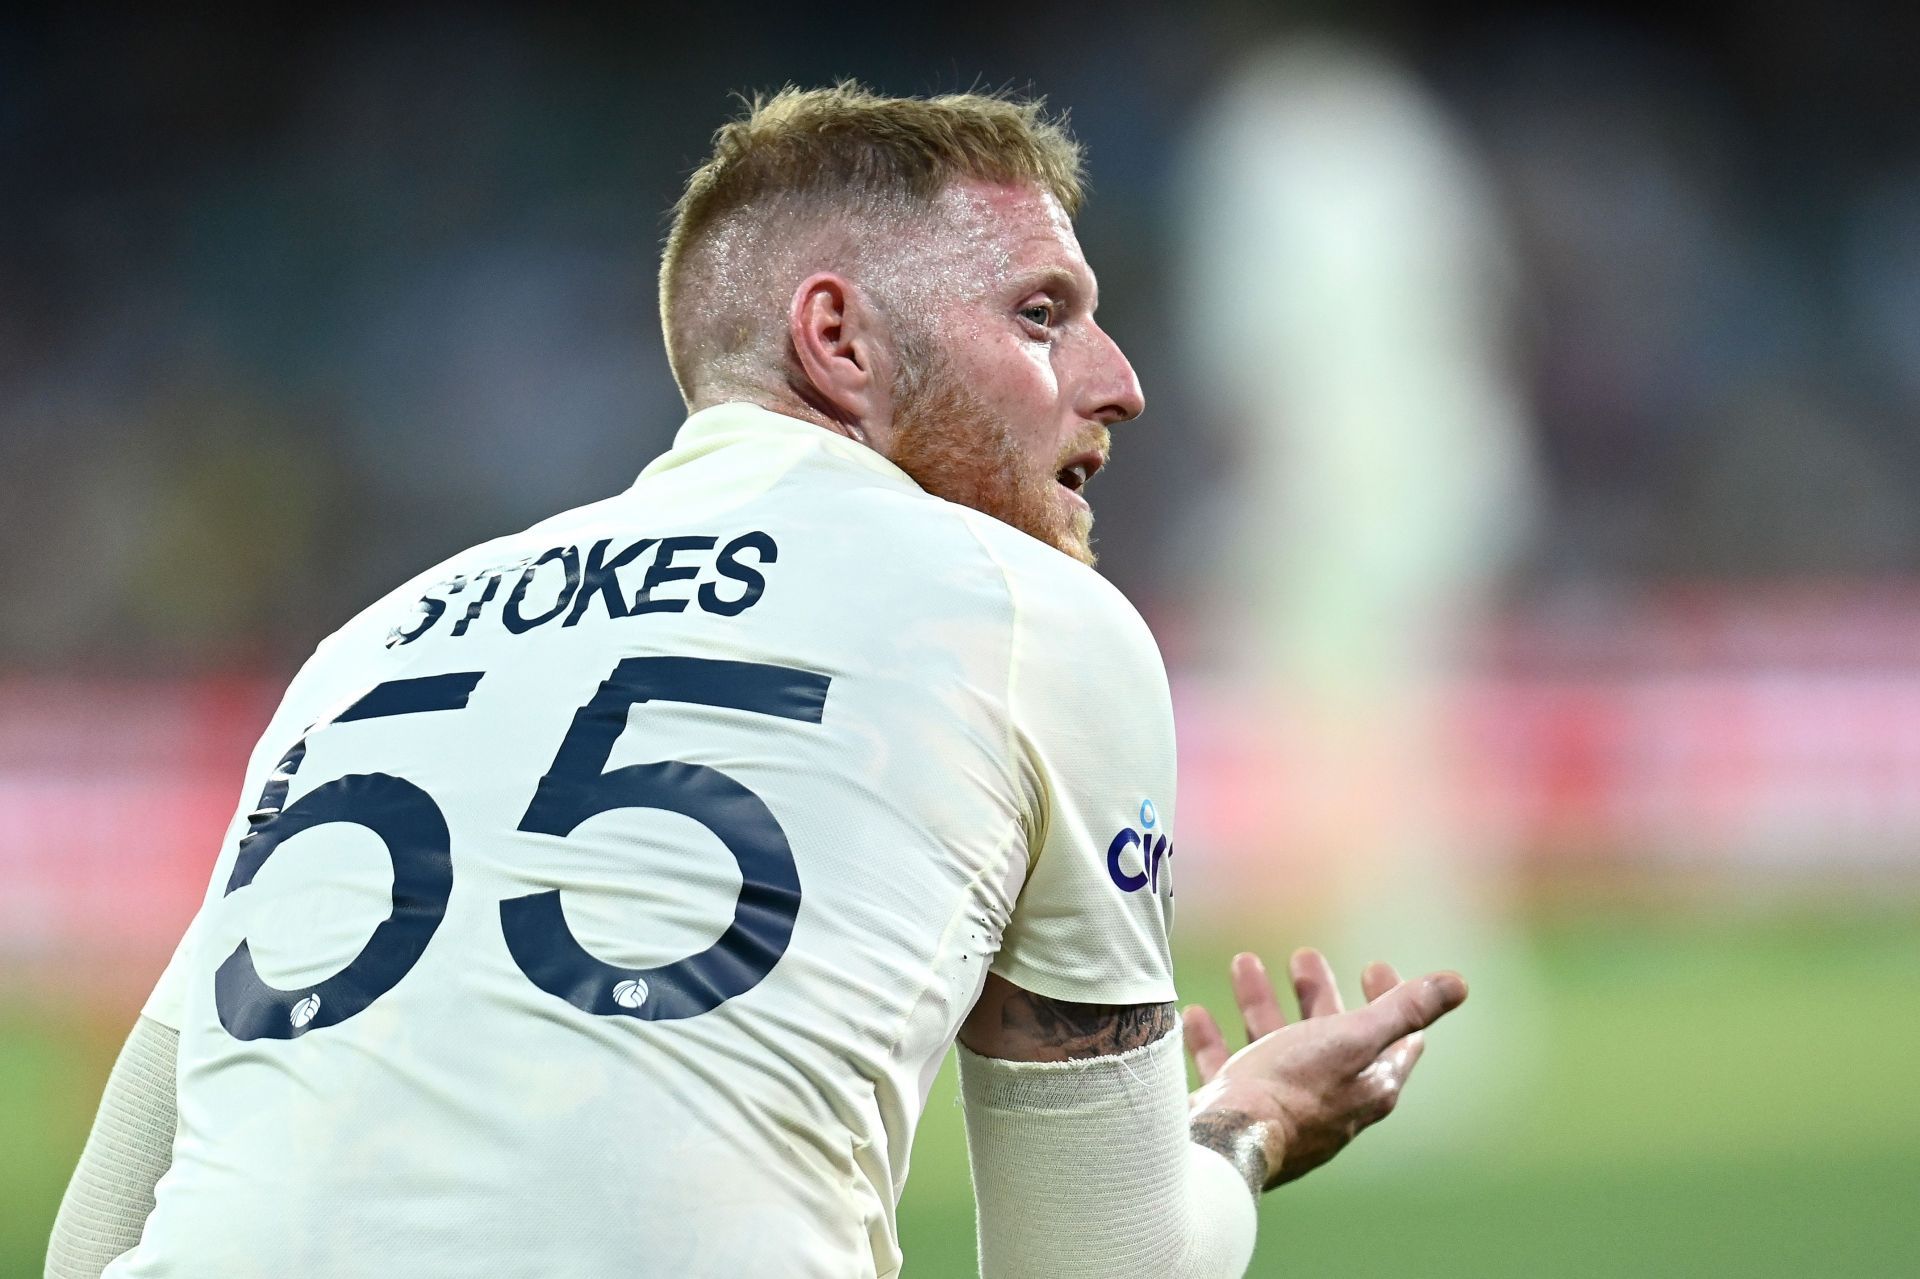 Ben Stokes. (Image source: Getty)